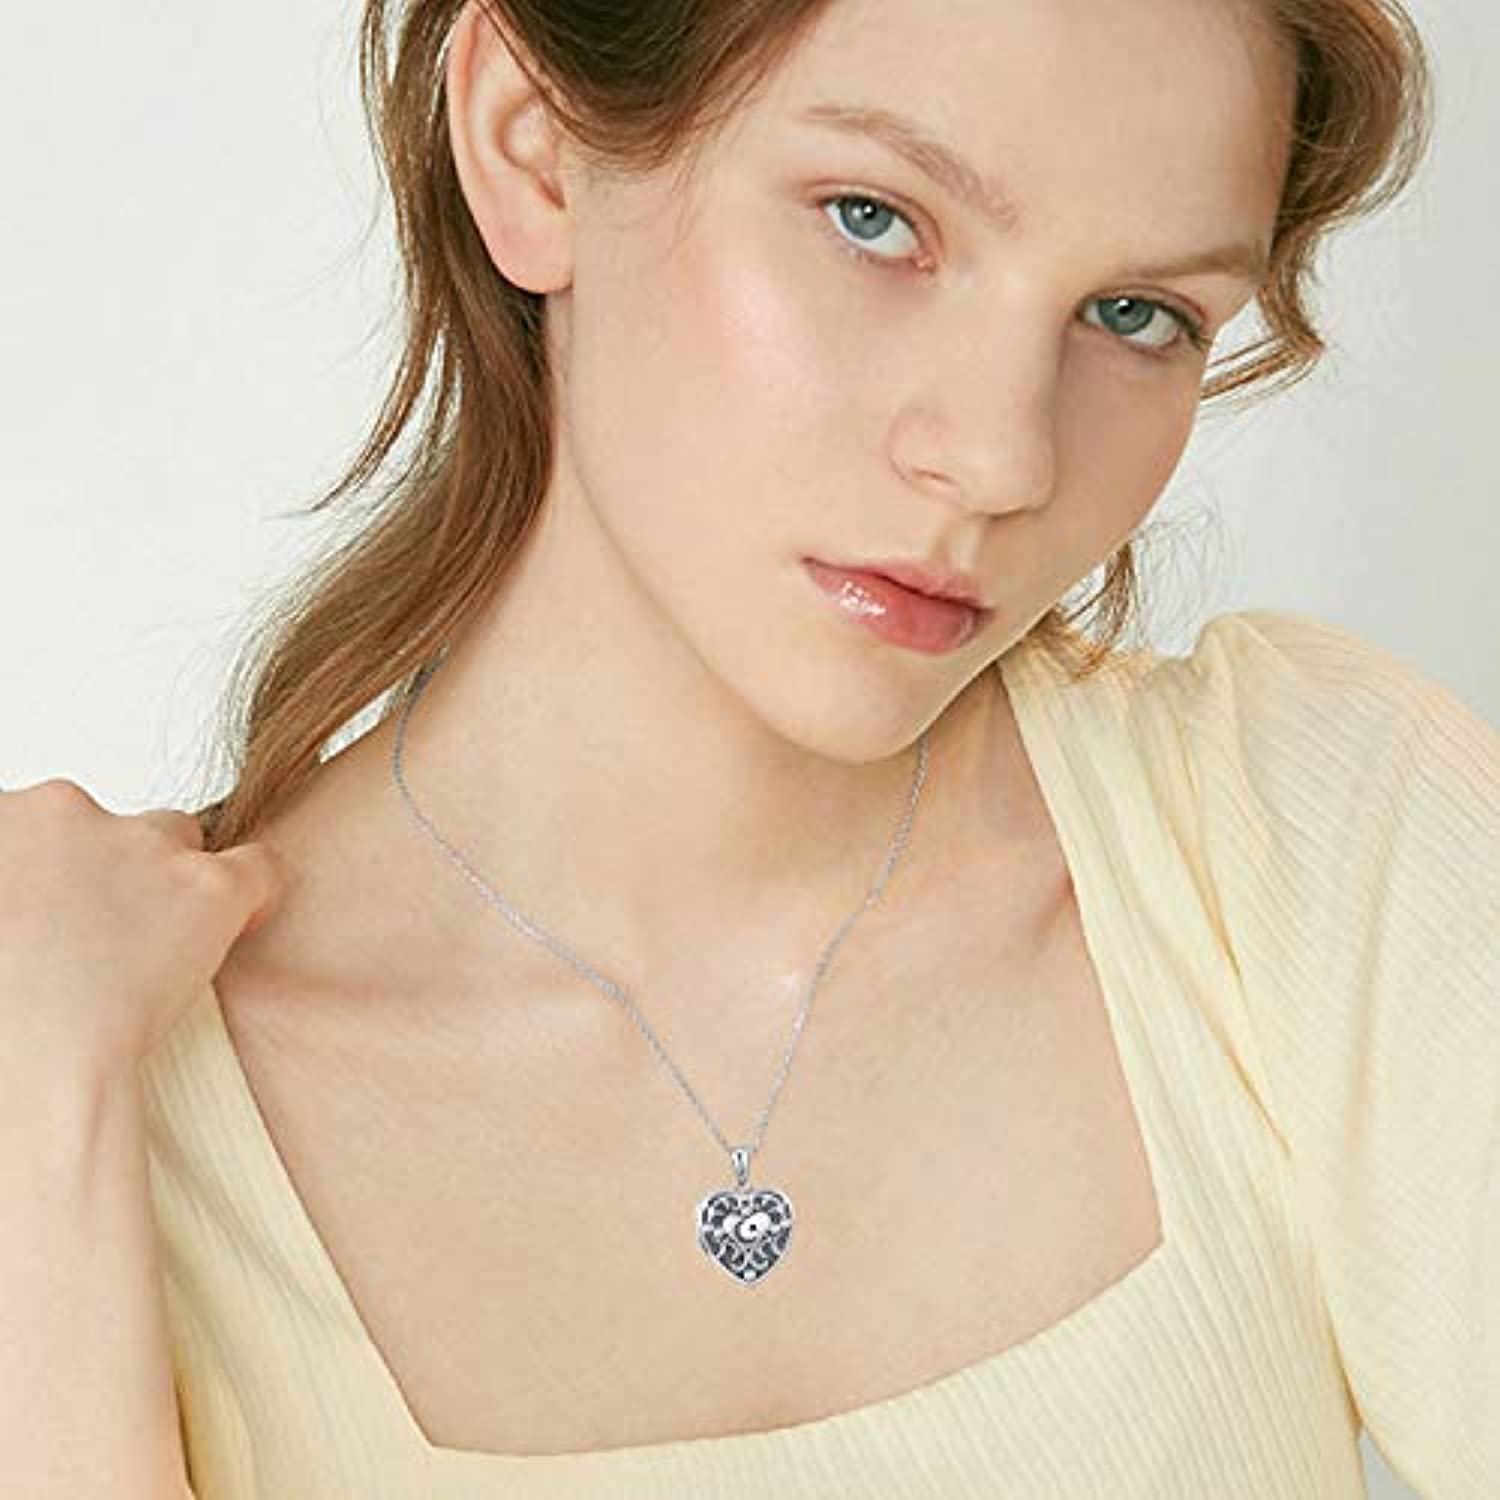 Crystal Heart Charm Pick Pearl 925 Sterling Silver Pearl Cage Necklace Pendant Locket Oval Shape Cage + Silver Plated Necklace + One White Pearl